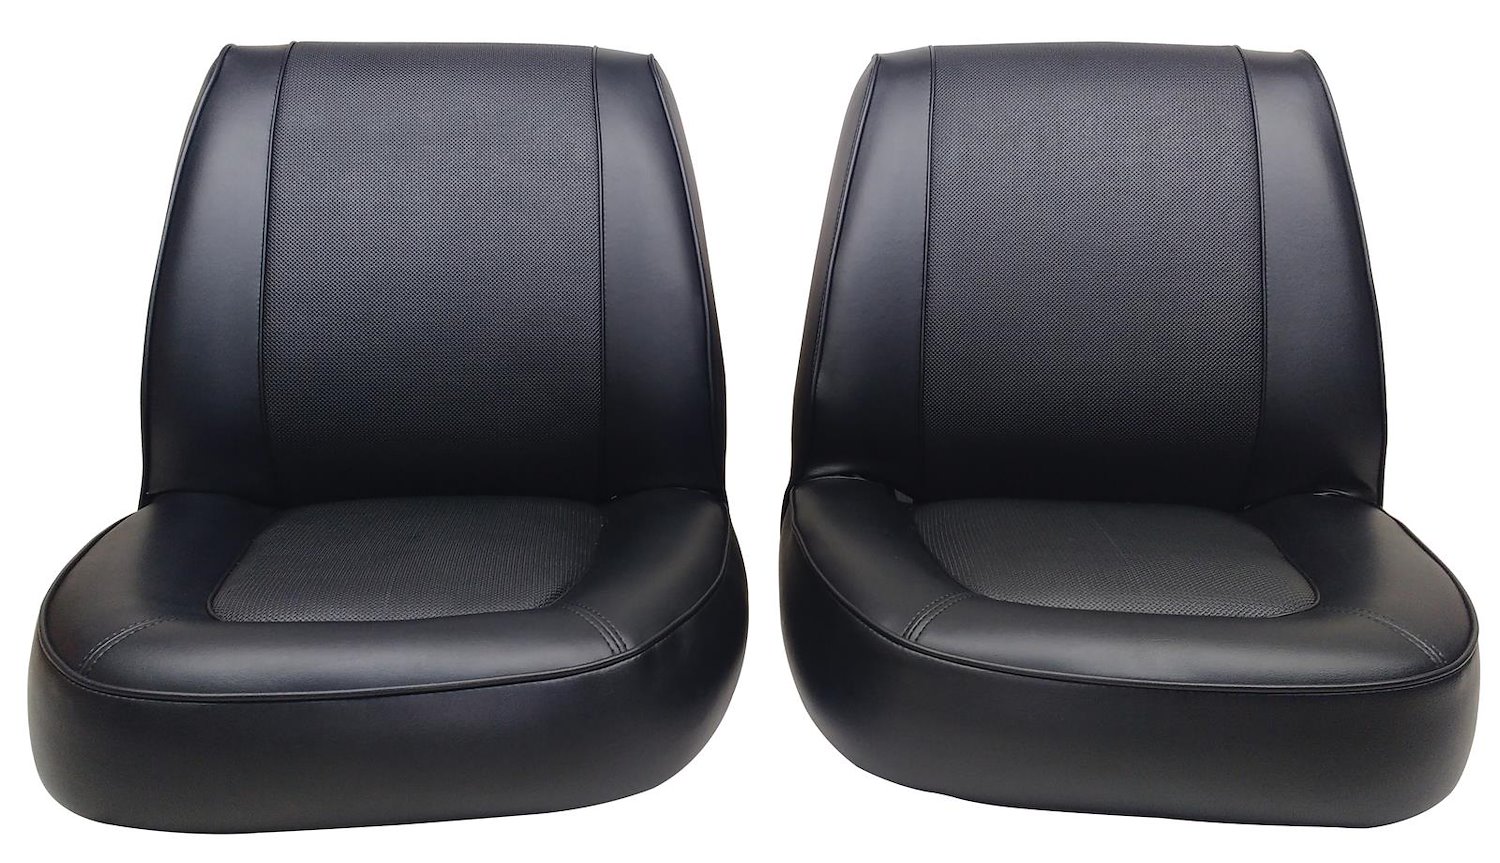 1965 Ford Falcon Futura Convertible Interior Two-Tone Front Bucket Seat Upholstery Set